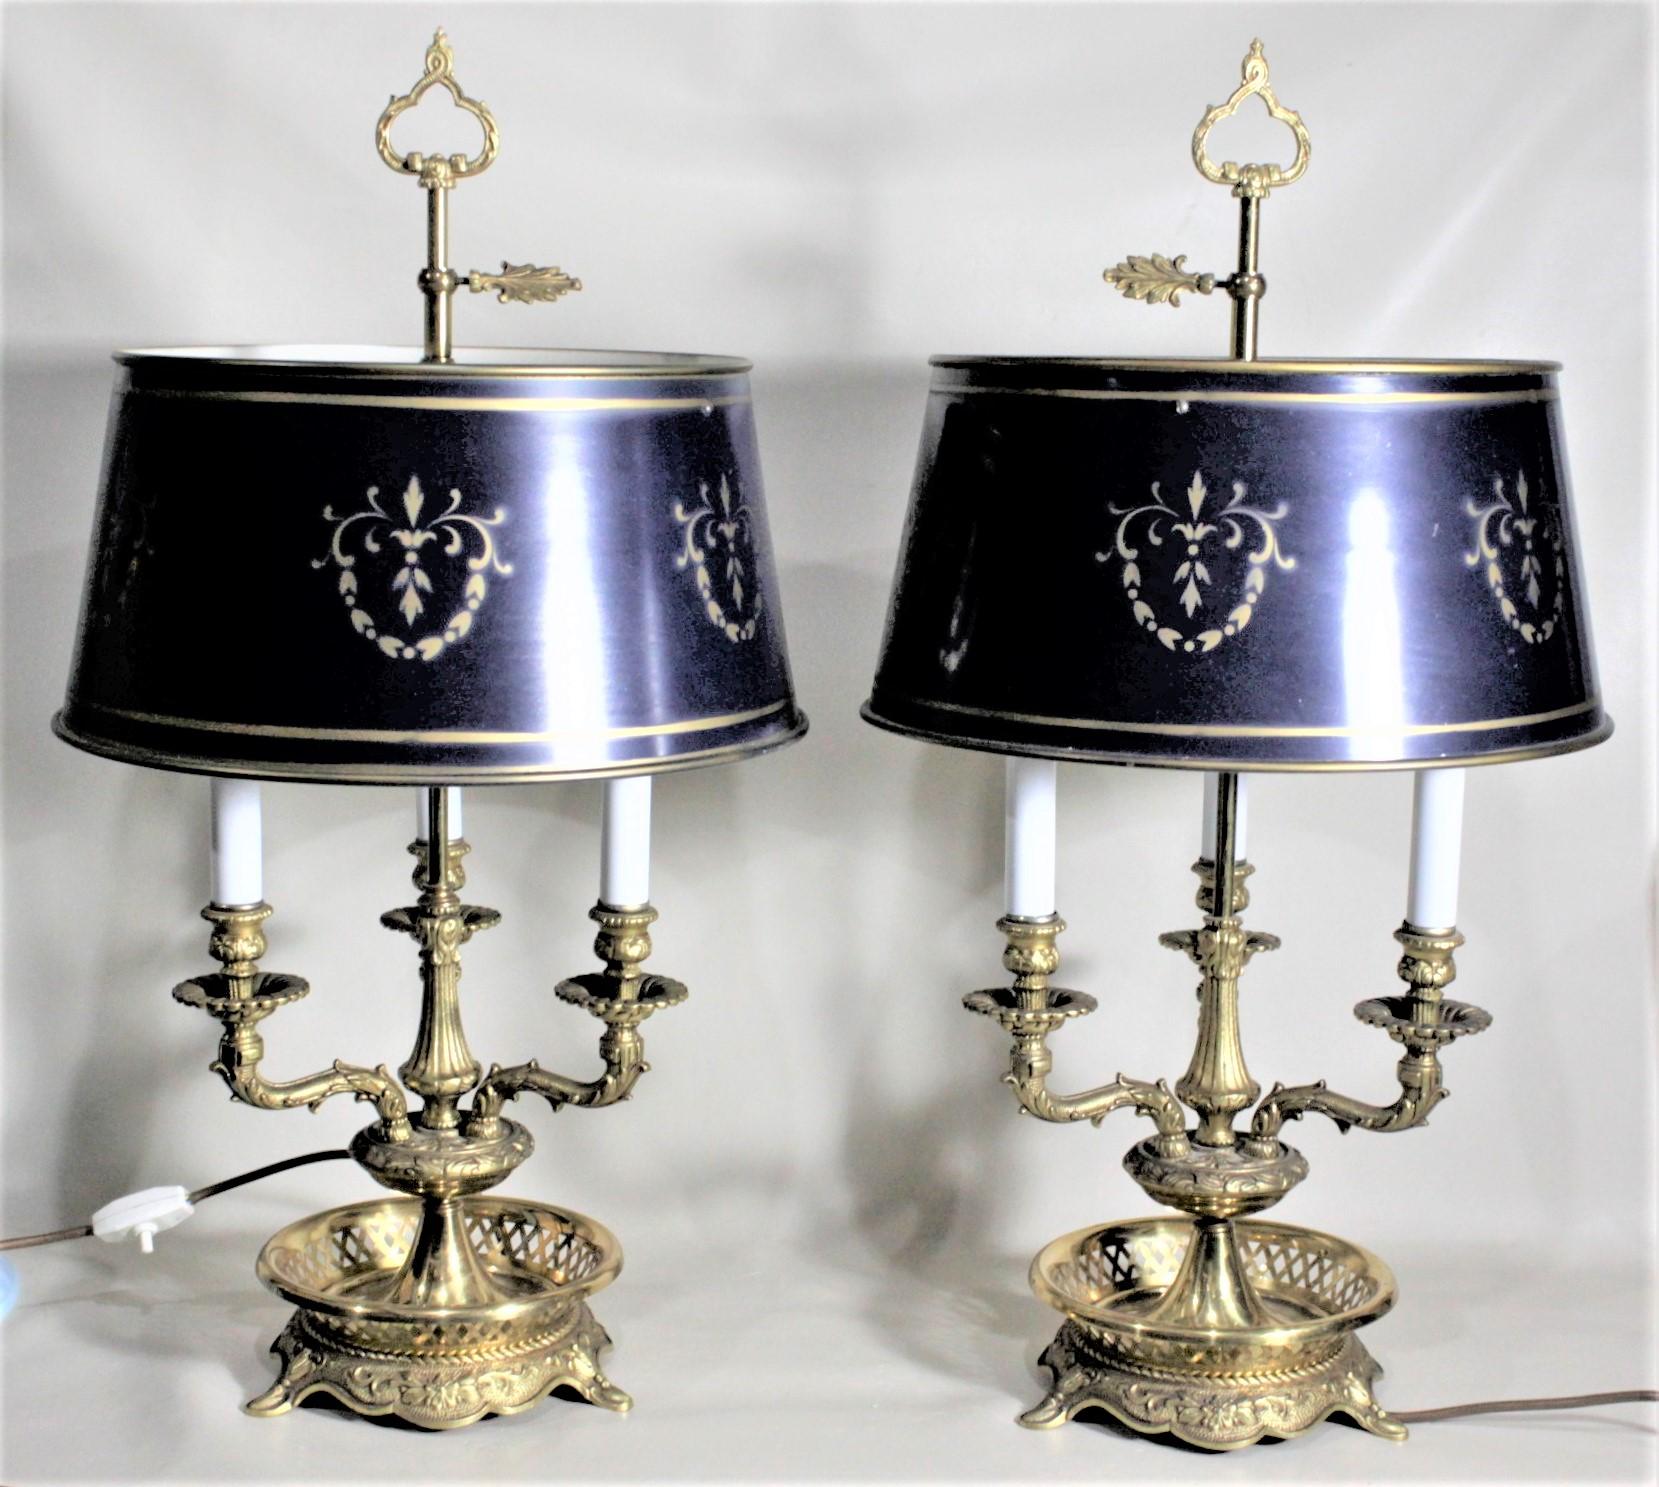 This pair of ornately cast brass Bouillotte lamps are unsigned, but presumed to have been made in France in approximately 1920 in the French Country style. The lamps have three chandelier arms which are nicely decorated with a leaves and flowers,